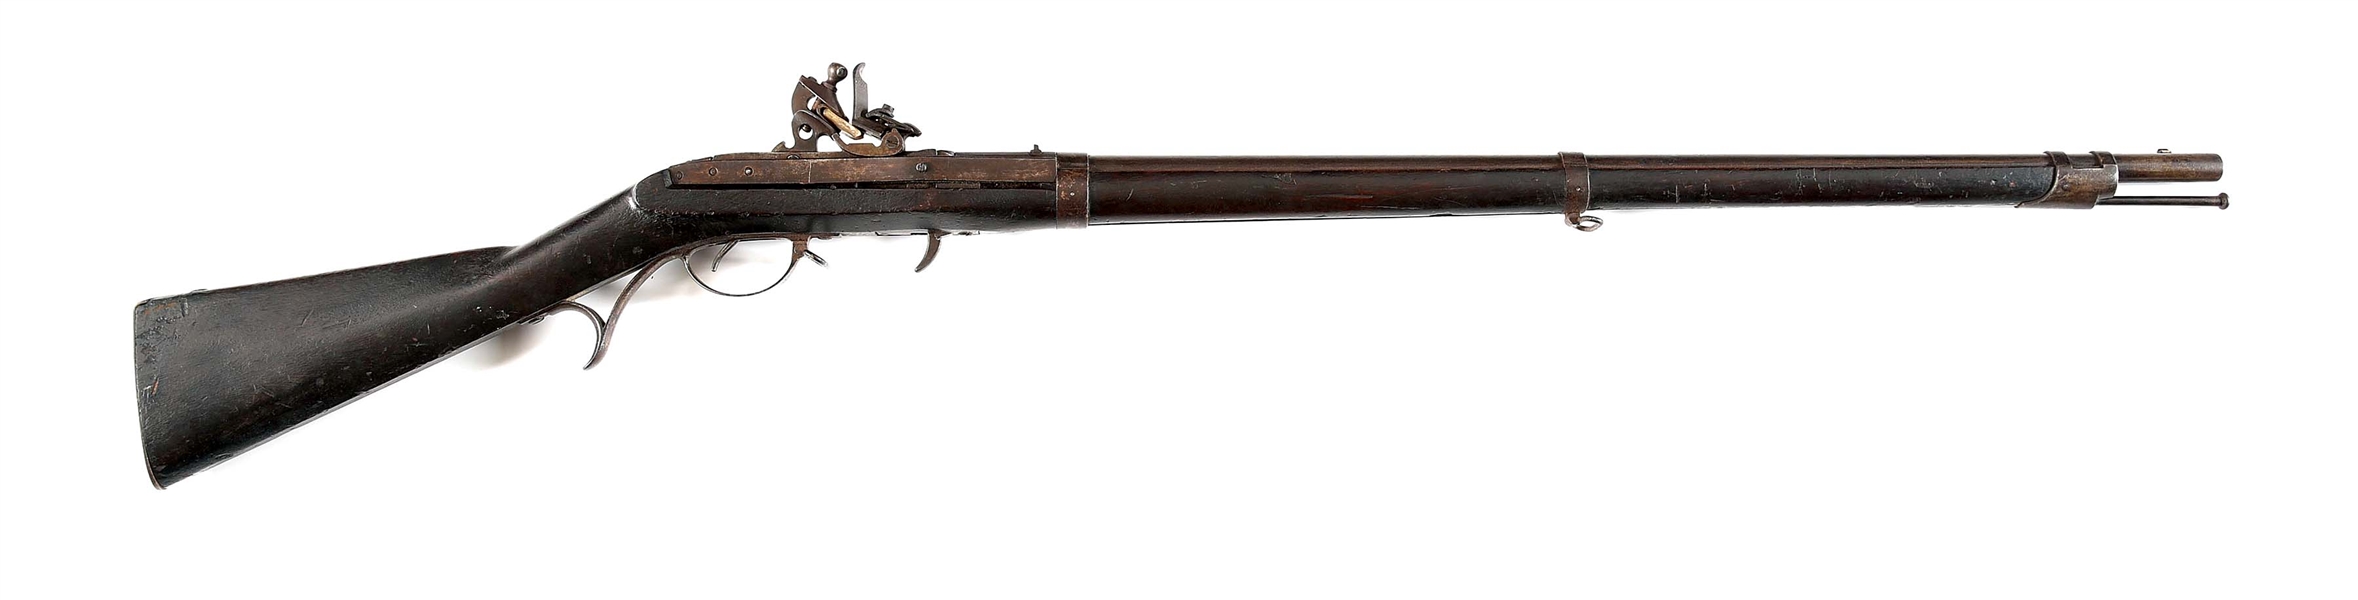 (A) US MODEL 1819 HALL BREECHLOADING RIFLE BY HARPERS FERRY DATED 1838. 